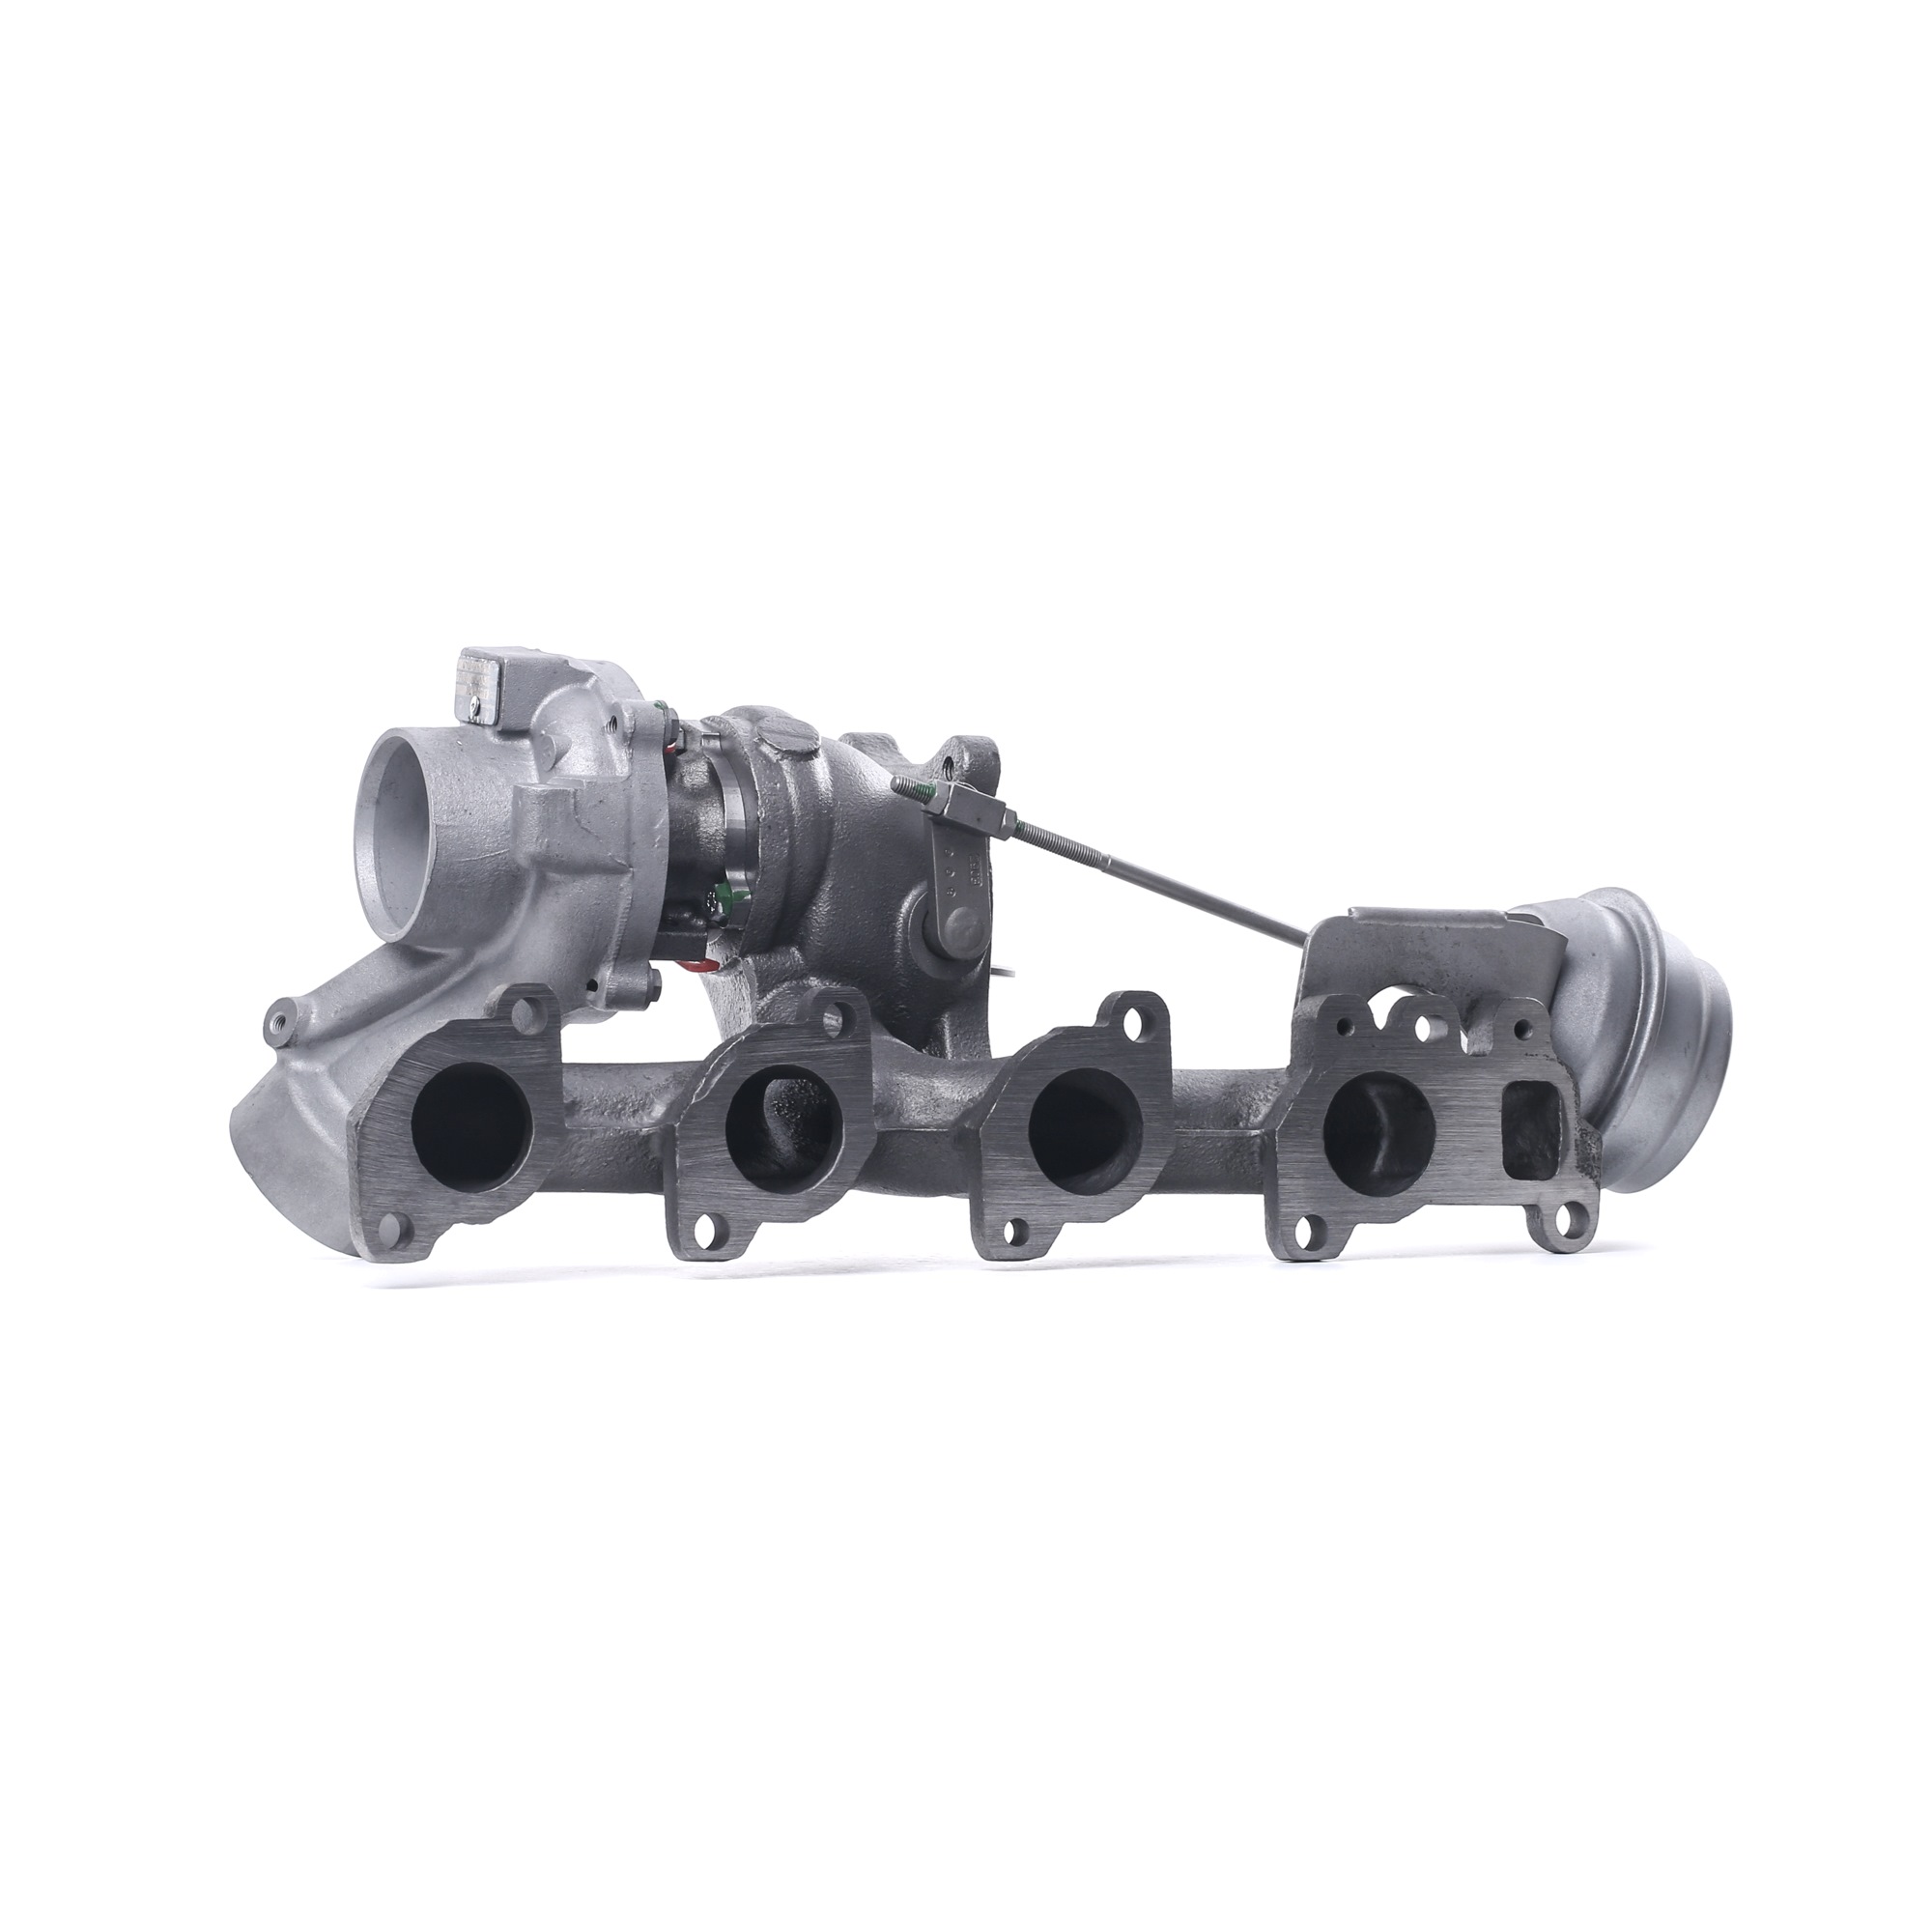 RIDEX REMAN 2234C10047R Turbocharger Exhaust Turbocharger, Pneumatically controlled actuator, Pneumatic, Upper, with gaskets/seals